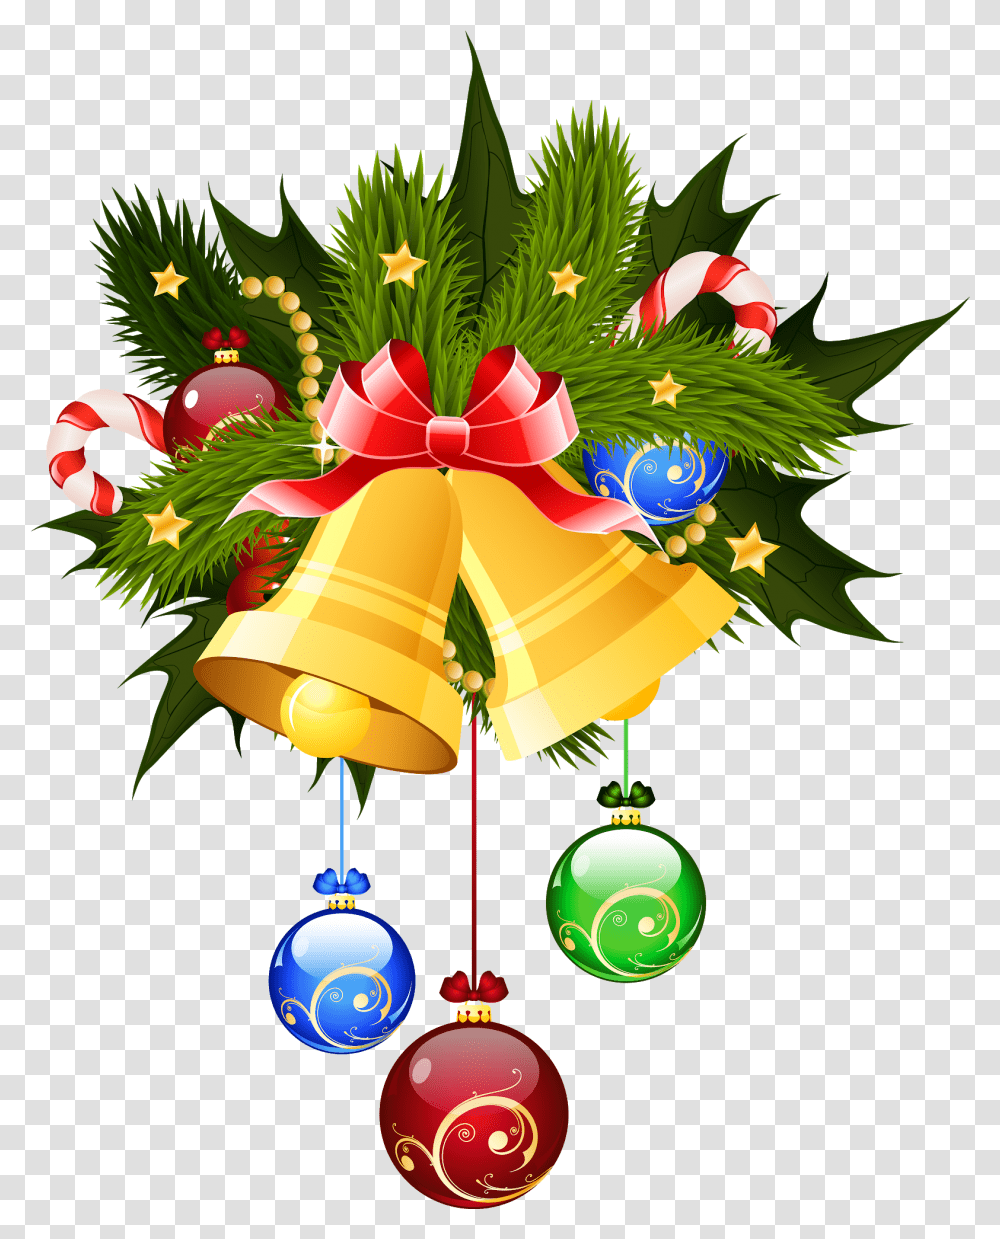 Pin By Pngsector On Christmas Amp Christmas Christmas Bell File, Ornament, Floral Design Transparent Png